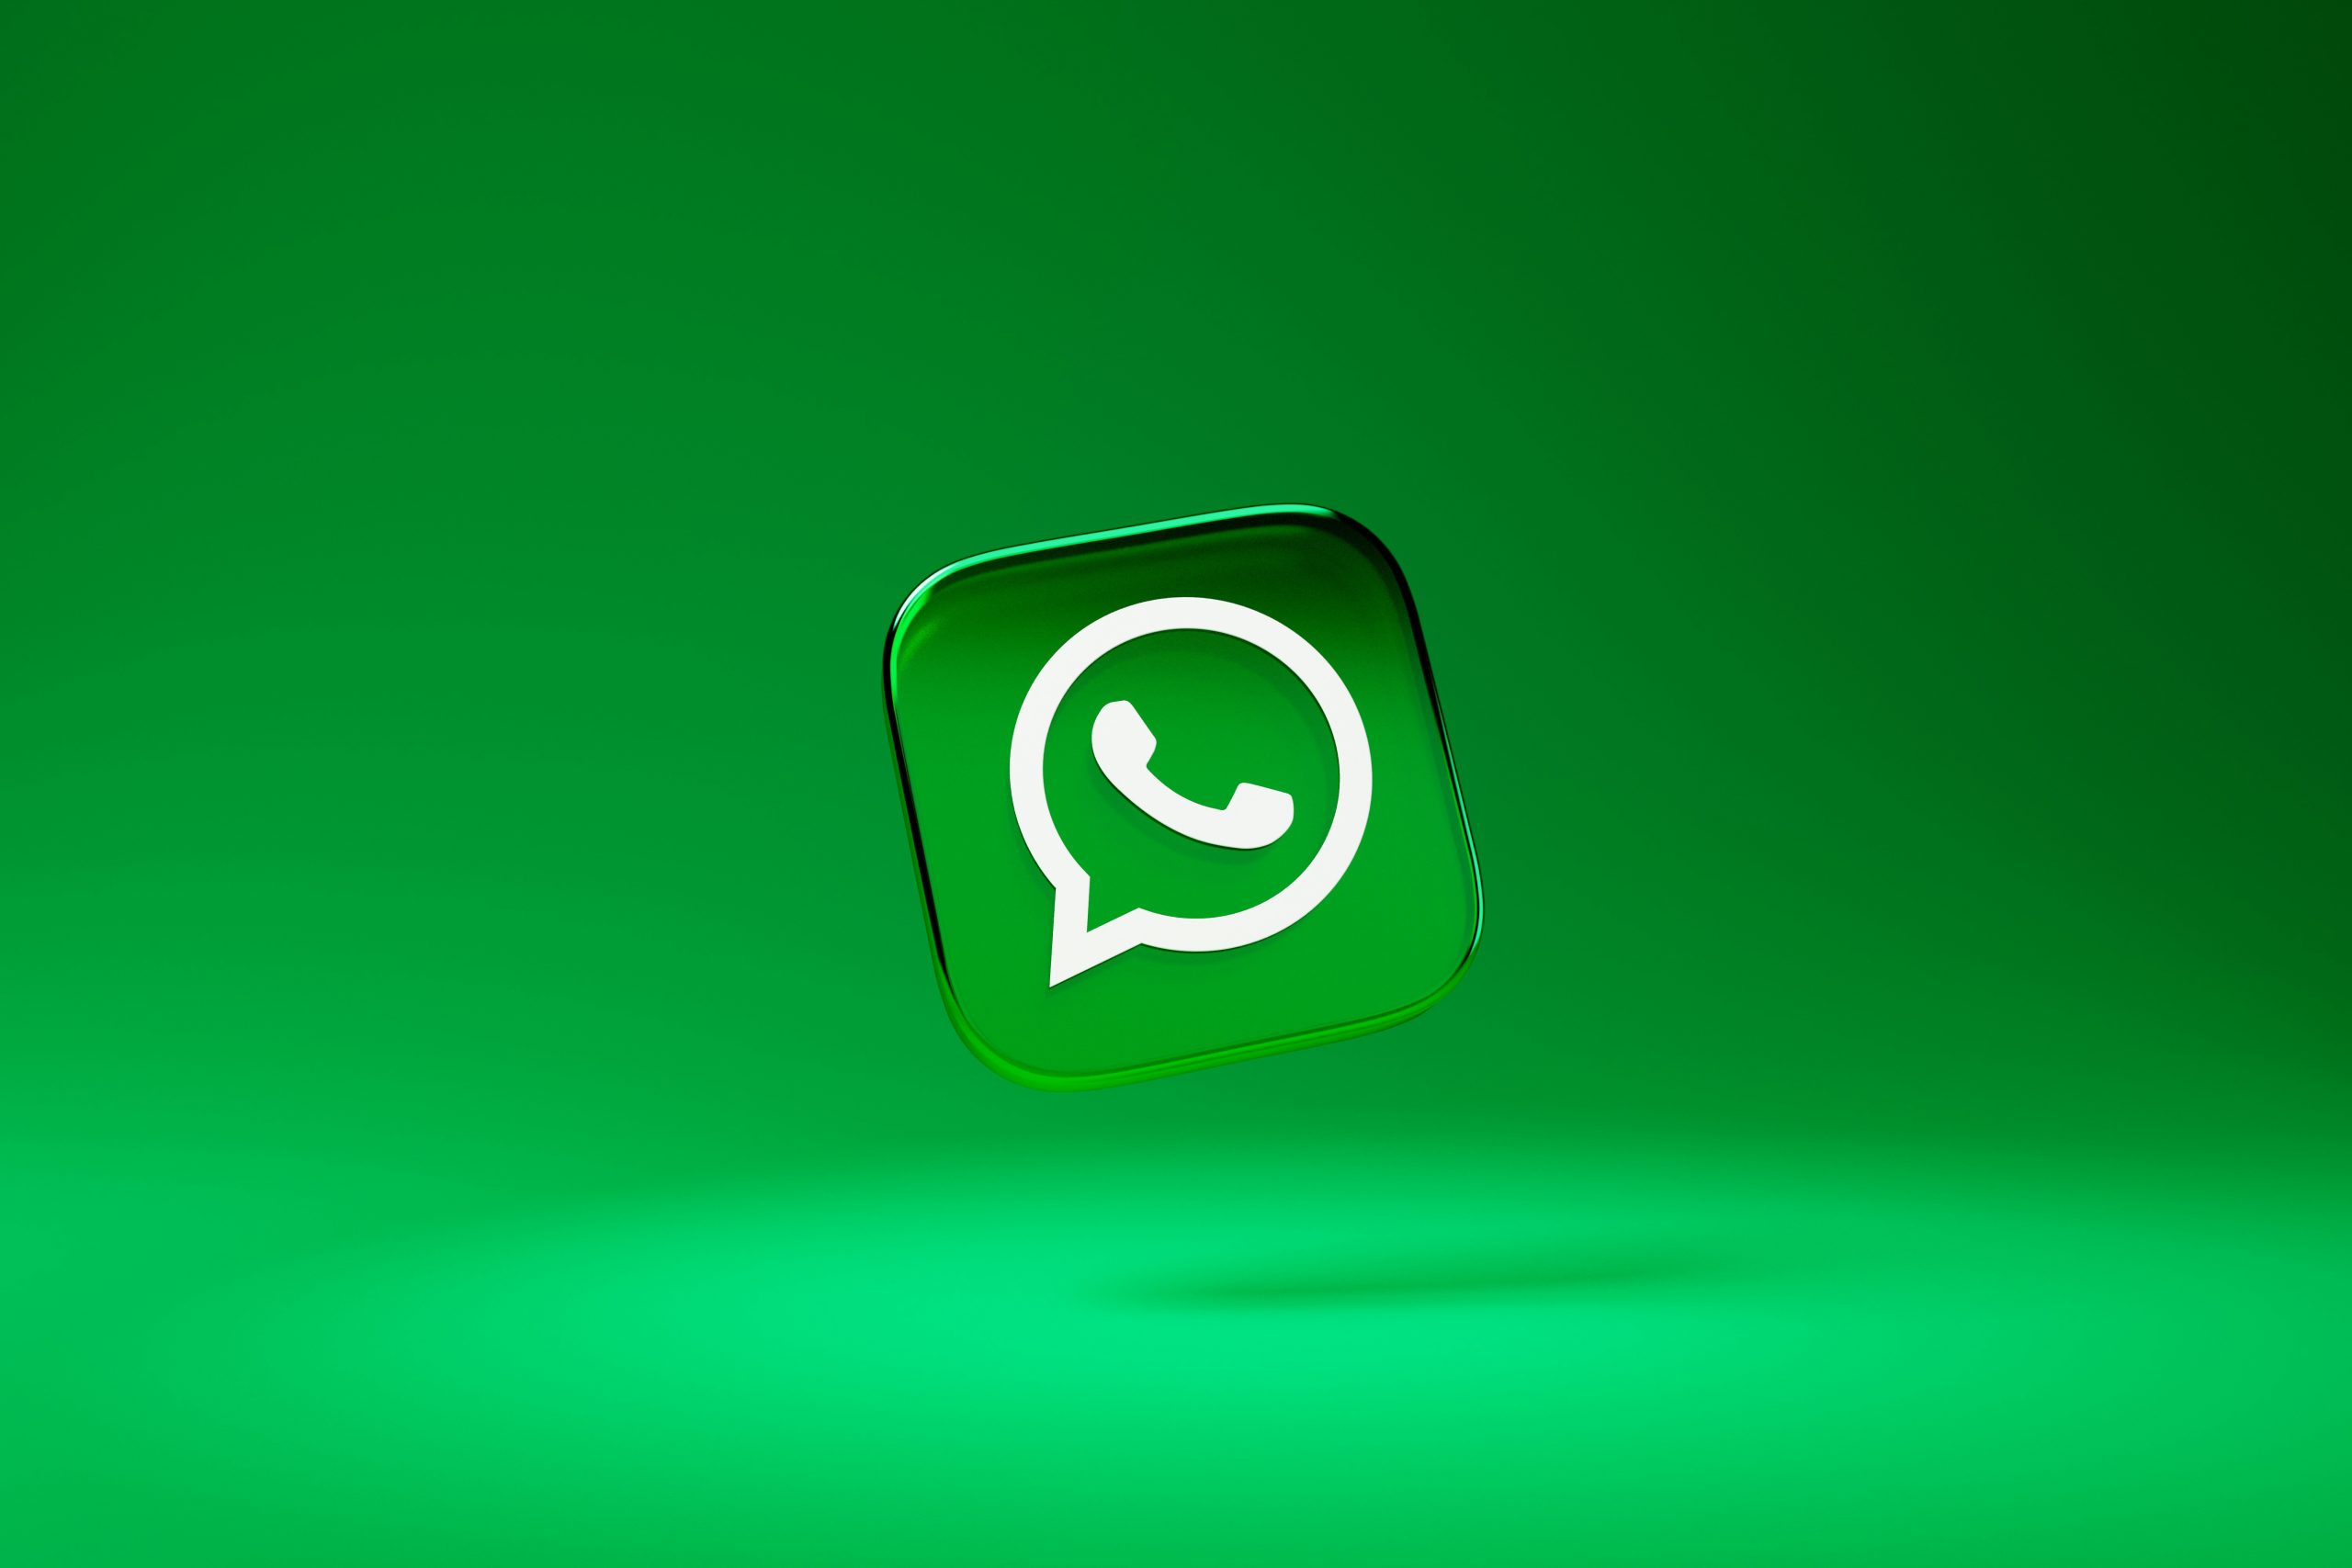 Additional Tips to Ensure Contact Visibility in WhatsApp